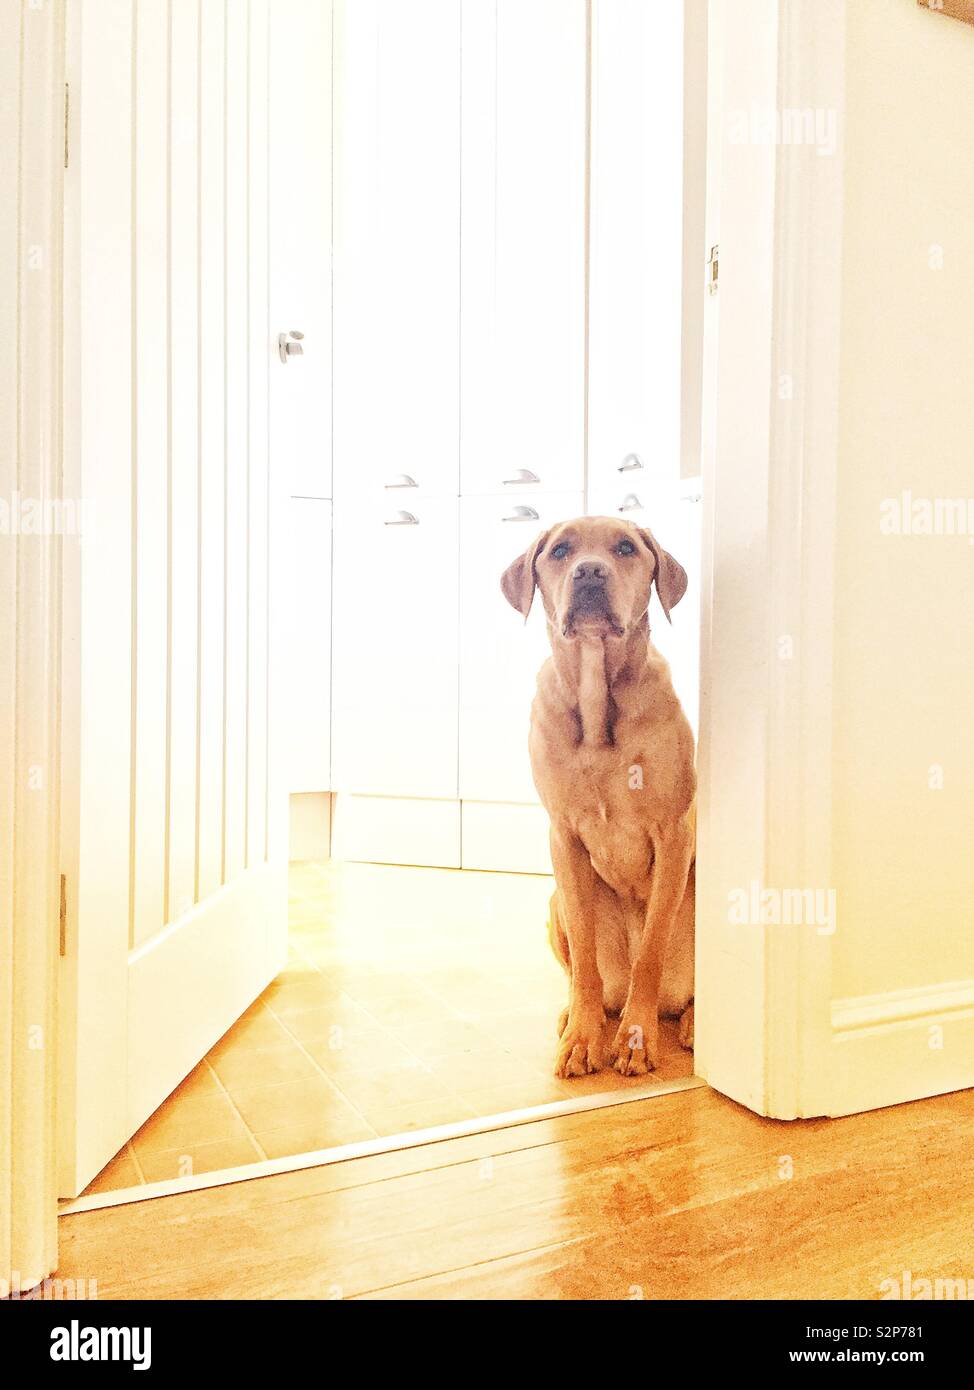 A cute and adorable yellow labrador retriever dog sitting in a brightly lit home interior waiting patiently for food from its master Stock Photo